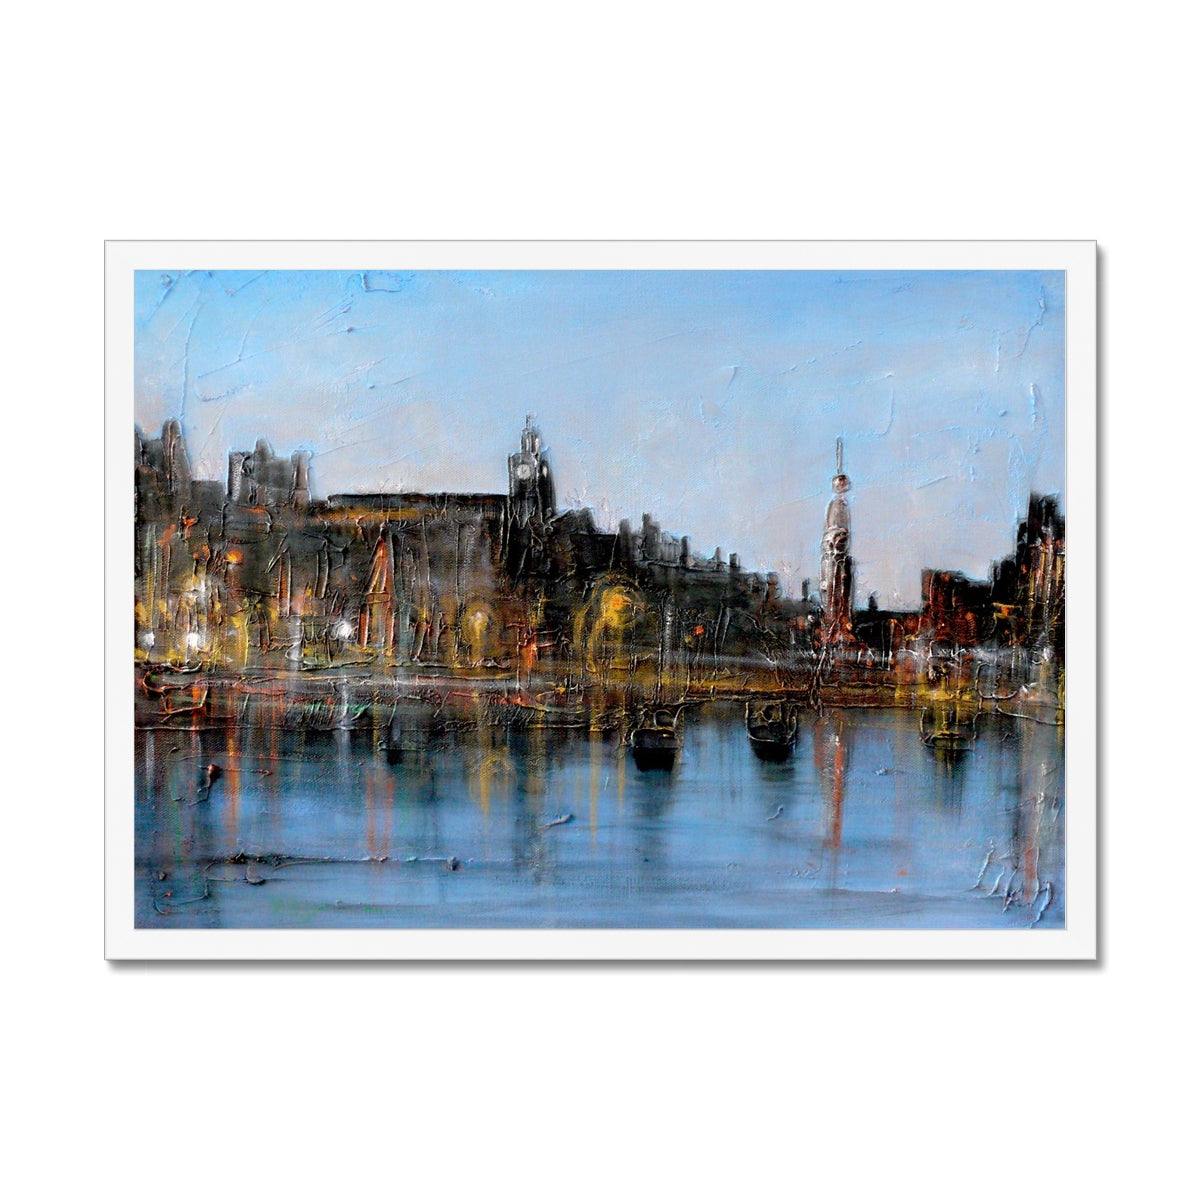 Winter In Amsterdam Painting | Framed Prints From Scotland-Framed Prints-World Art Gallery-A2 Landscape-White Frame-Paintings, Prints, Homeware, Art Gifts From Scotland By Scottish Artist Kevin Hunter